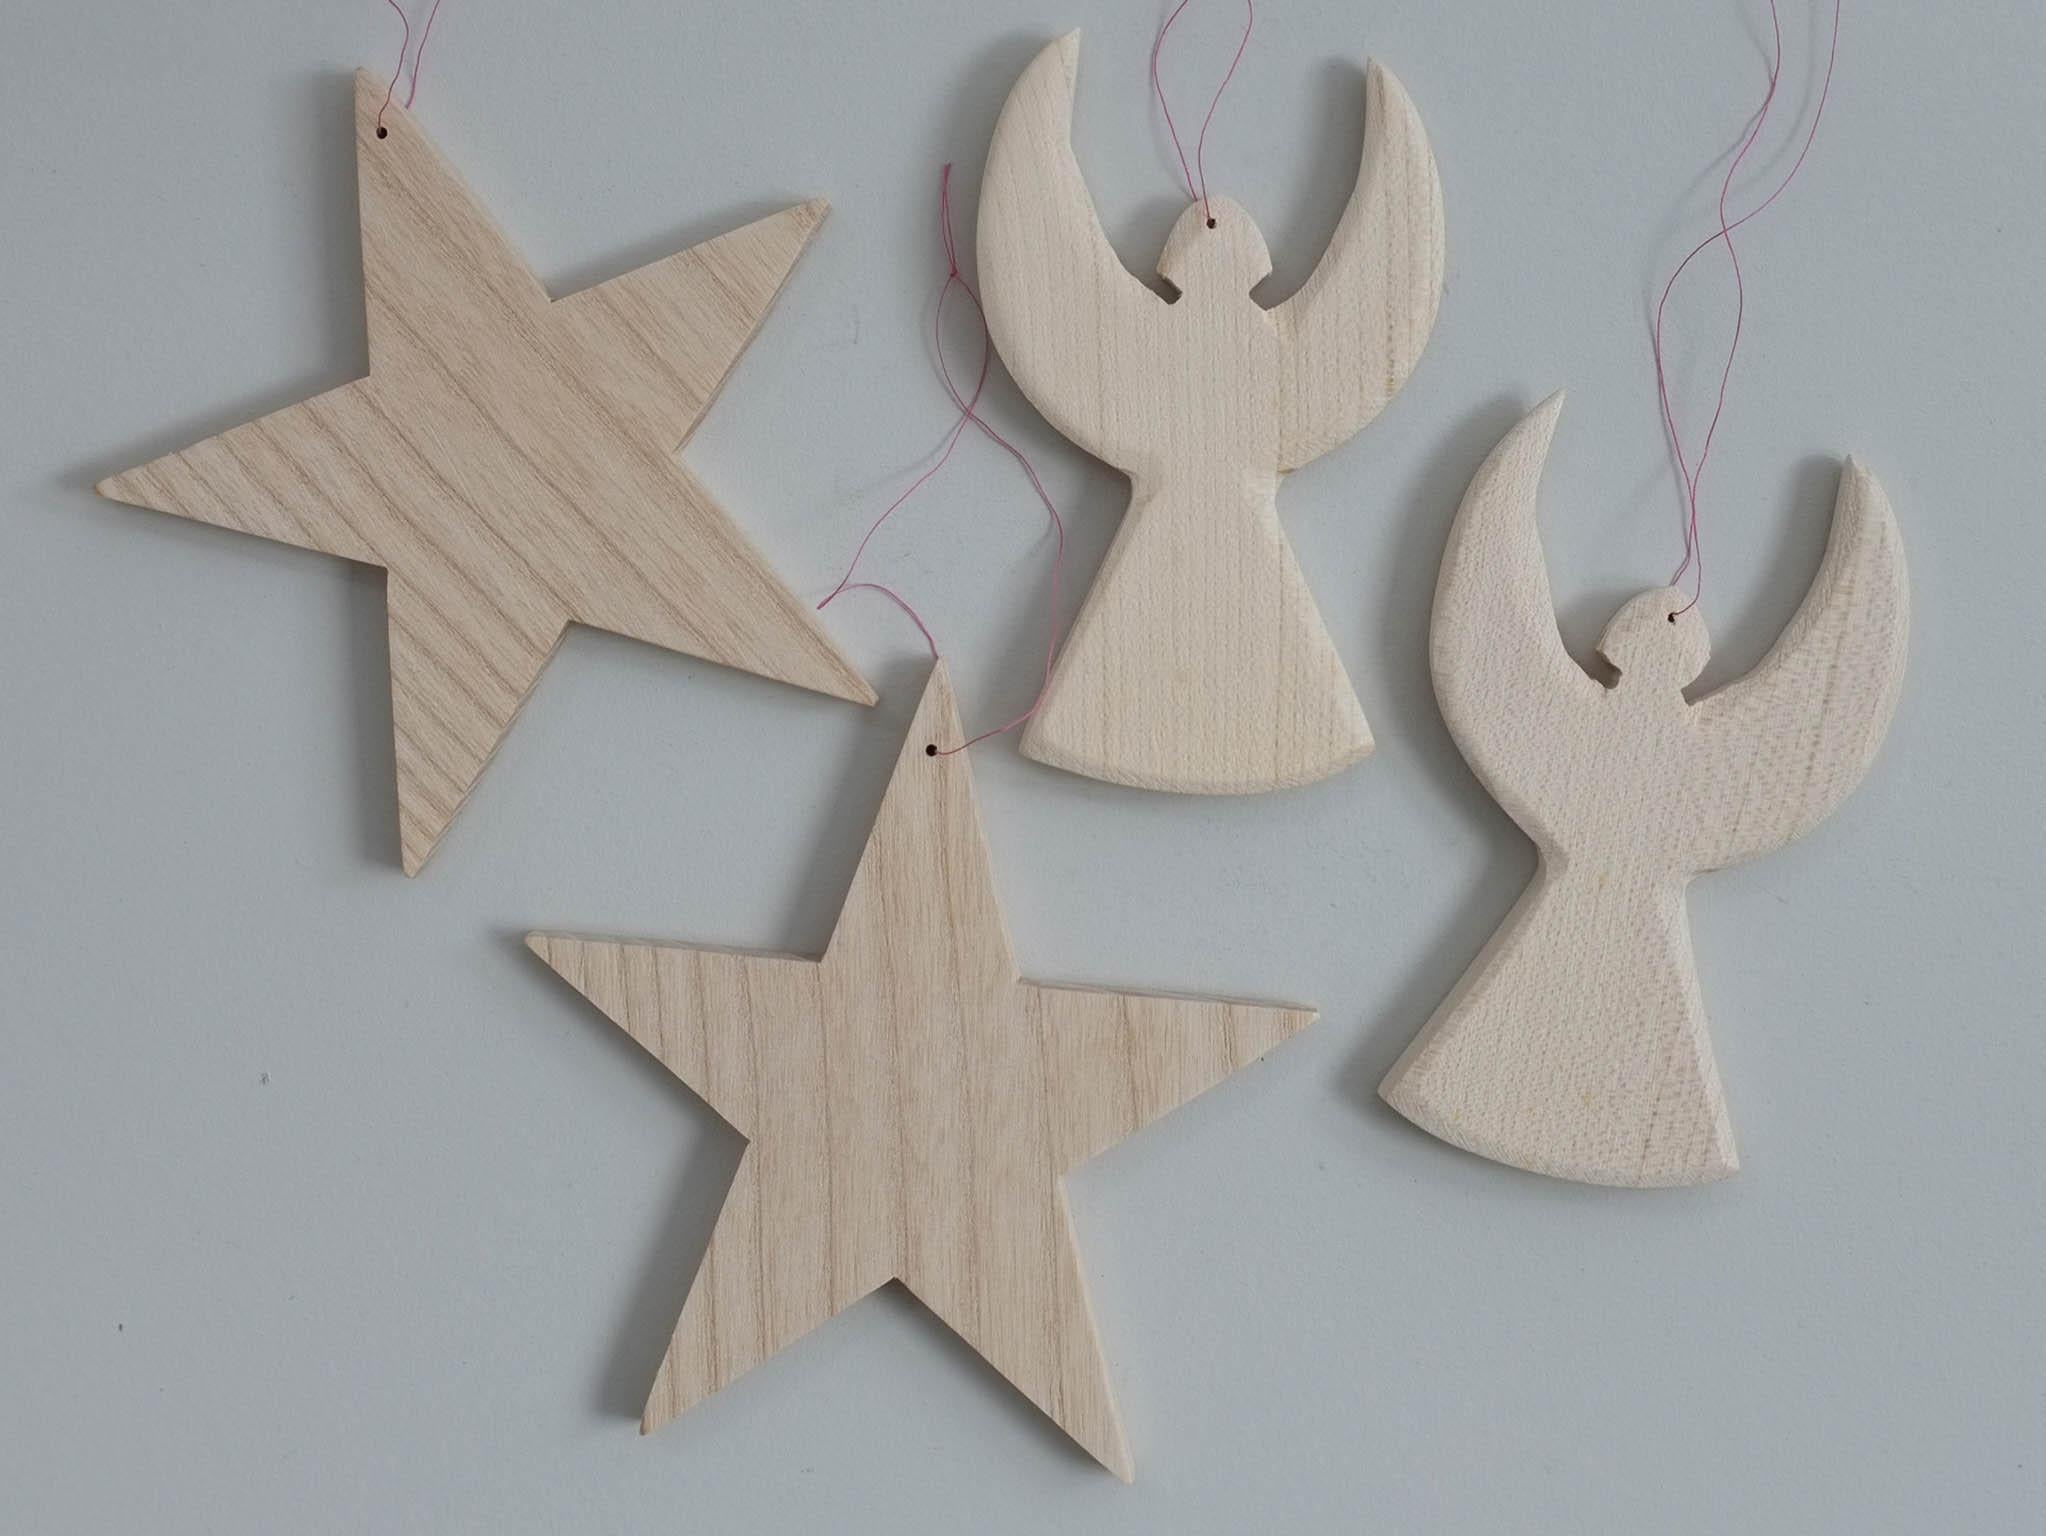 These Scandi wooden decorations are handmade by a team at The Grange, a residential community for people with learning disabilities, £9.95 Aerende.co.uk